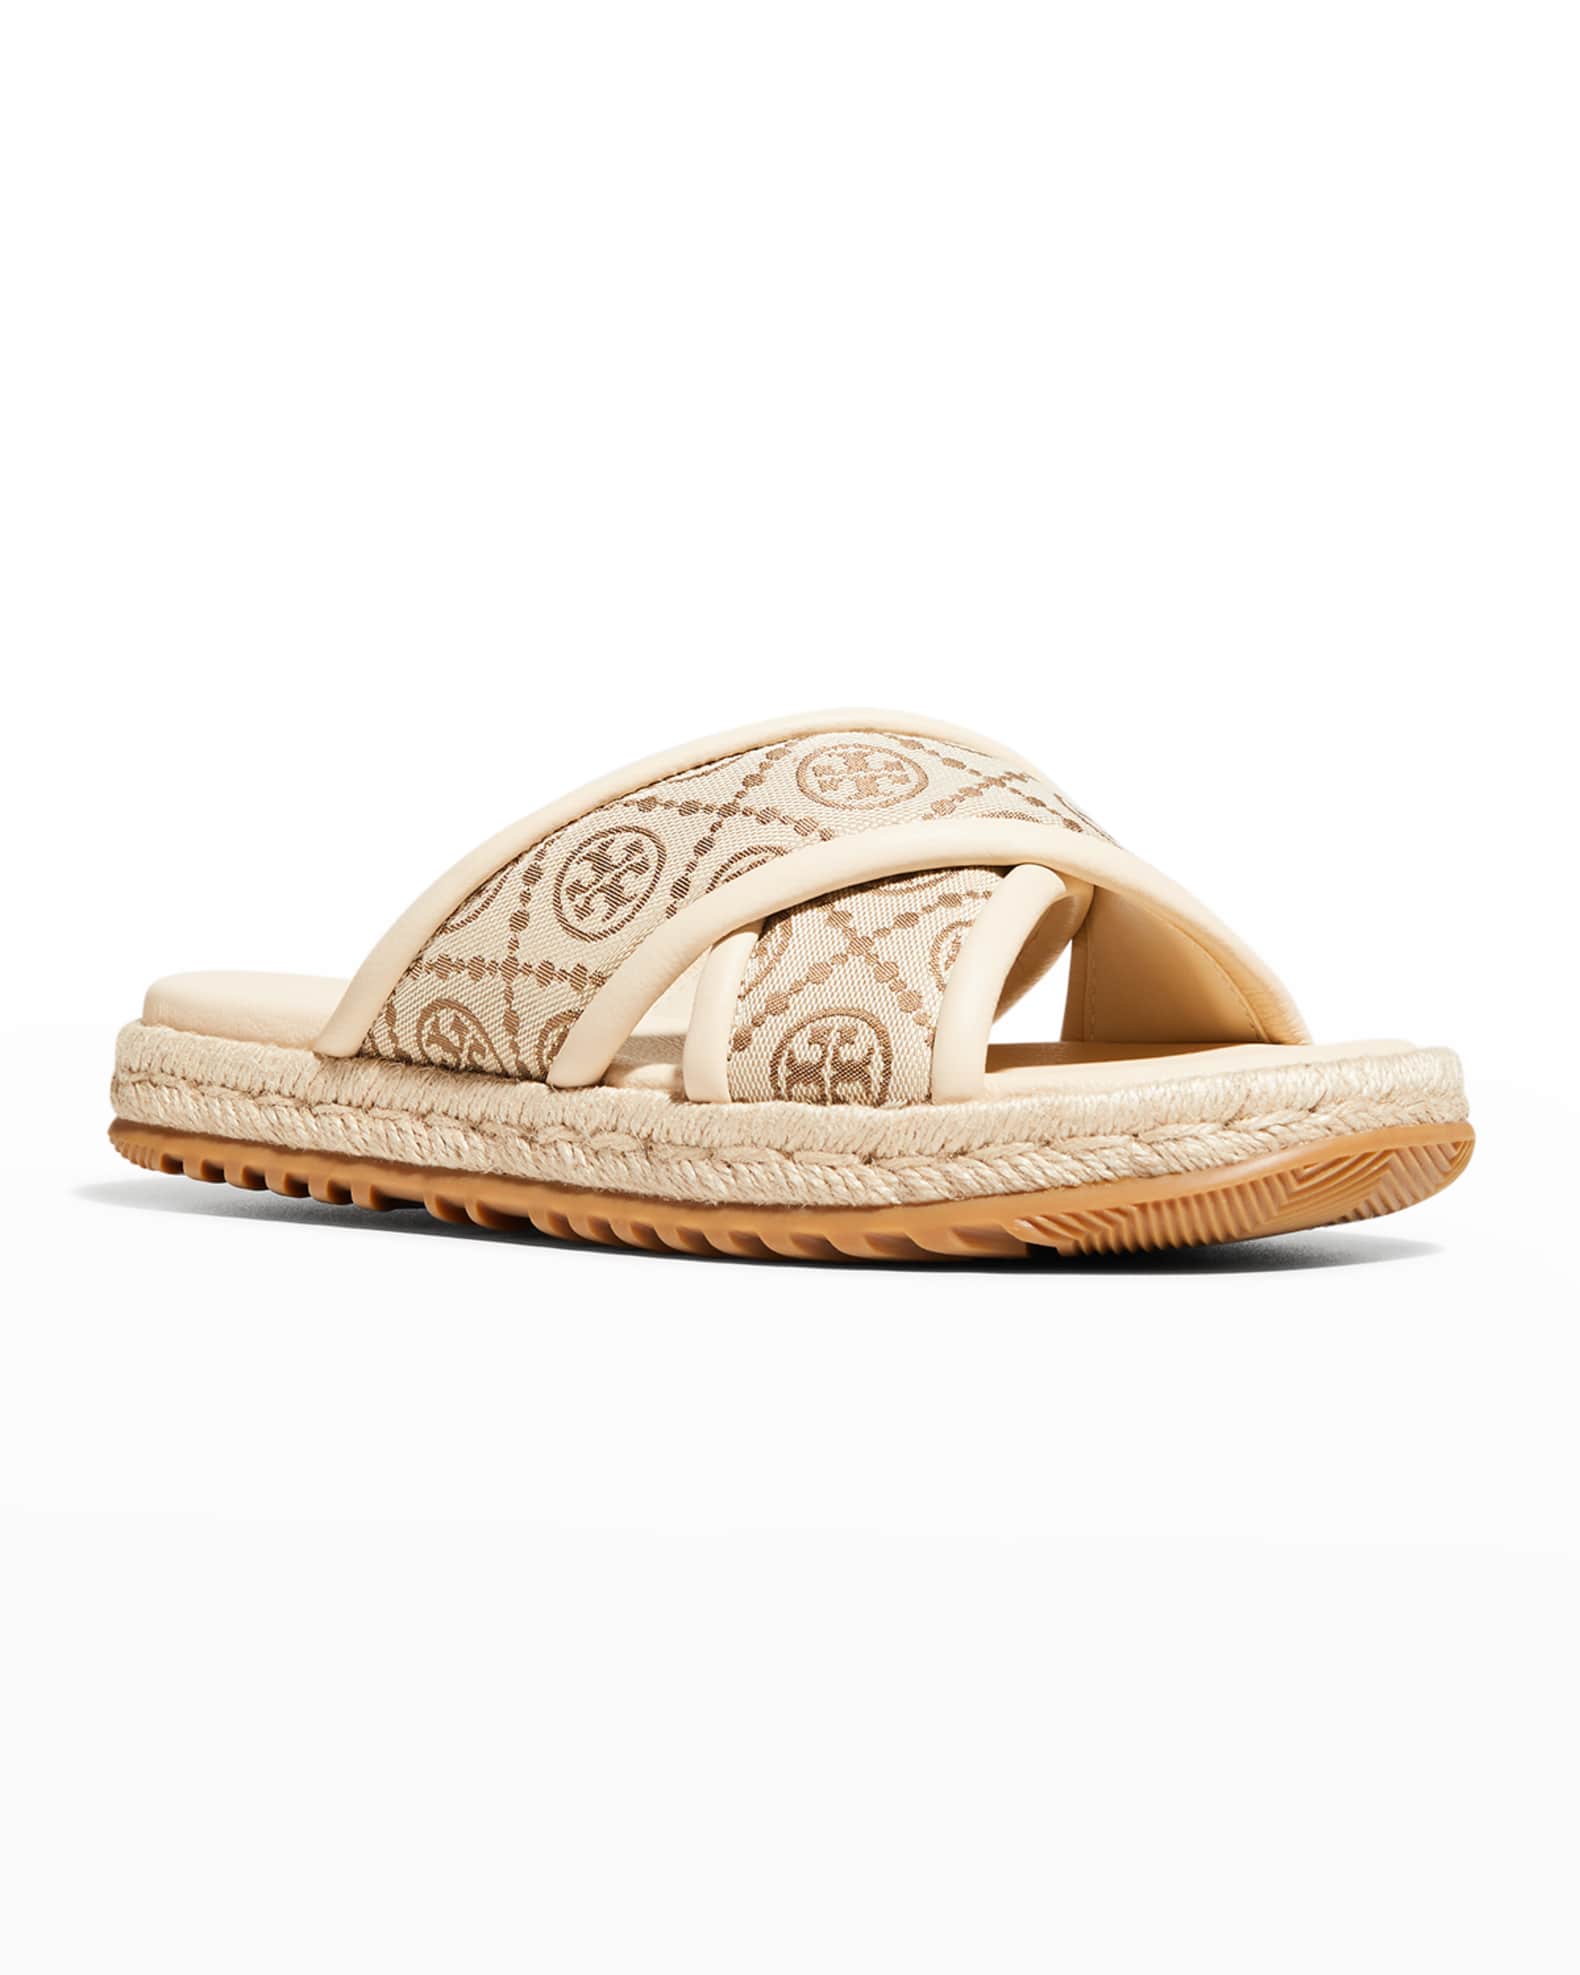 Tory Burch Blossom Espadrille-Nappa Leather size 5 